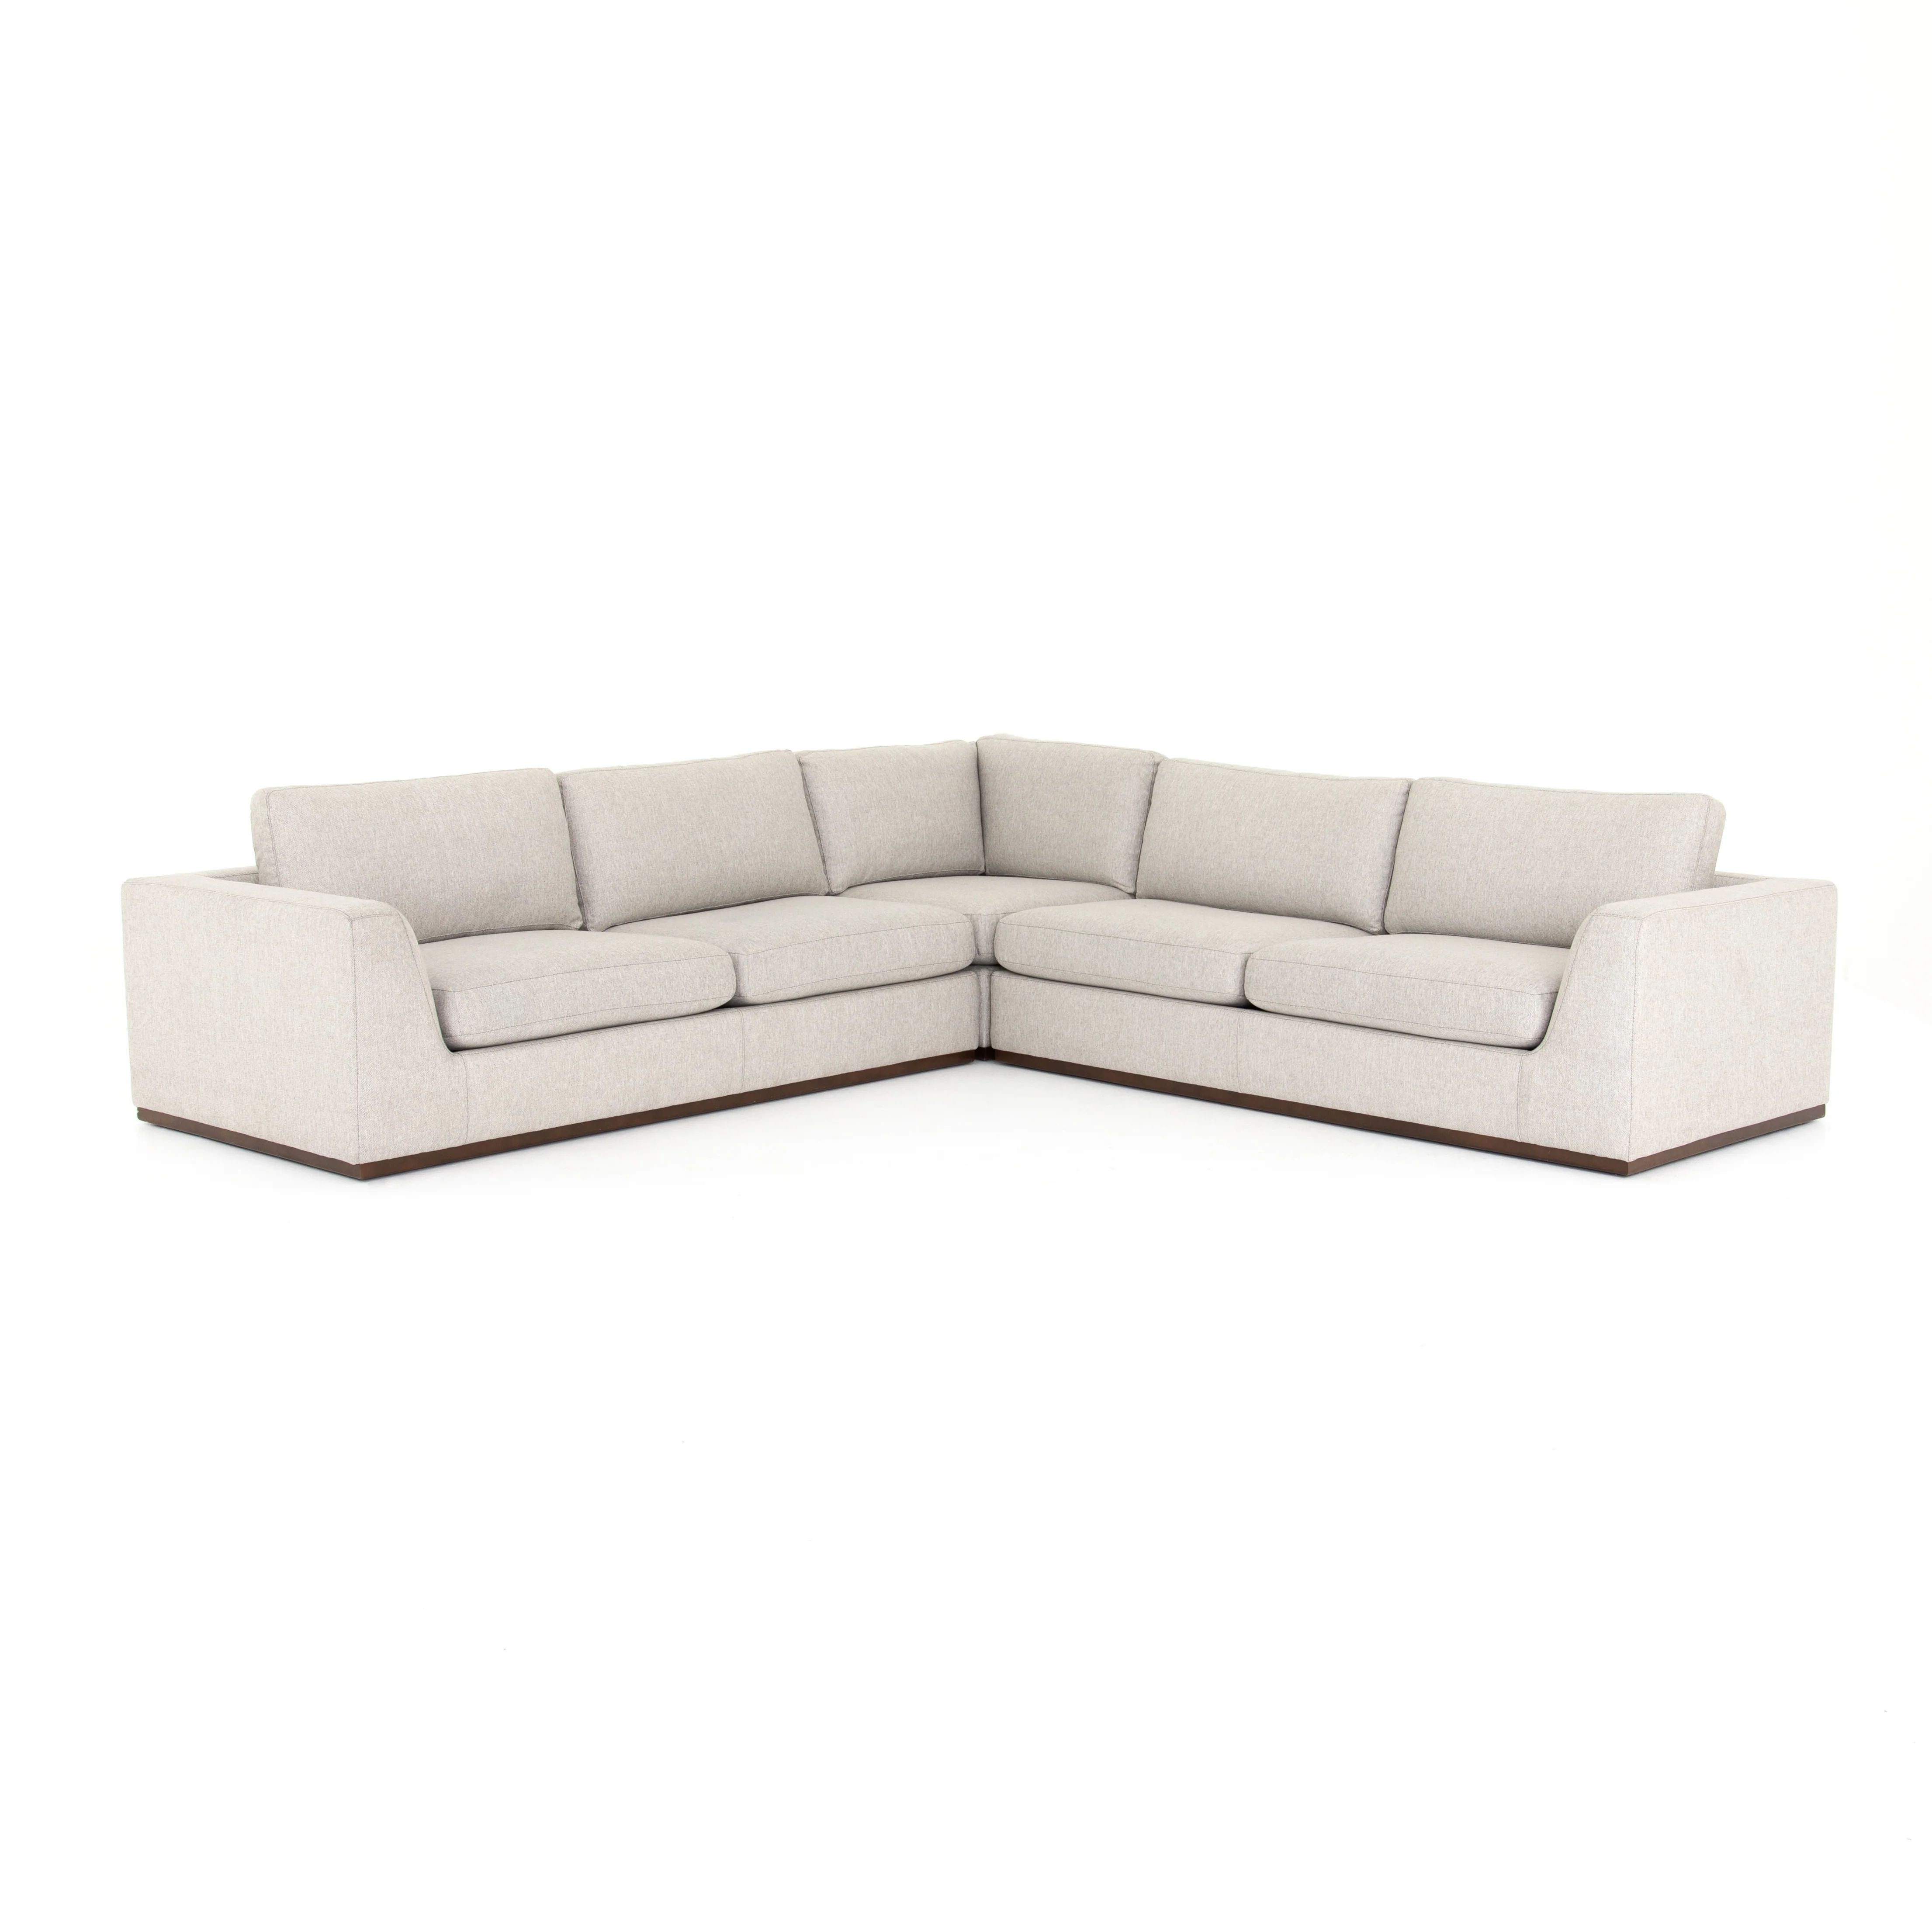 Colt 3 Piece Sectional in Various Colors | Burke Decor